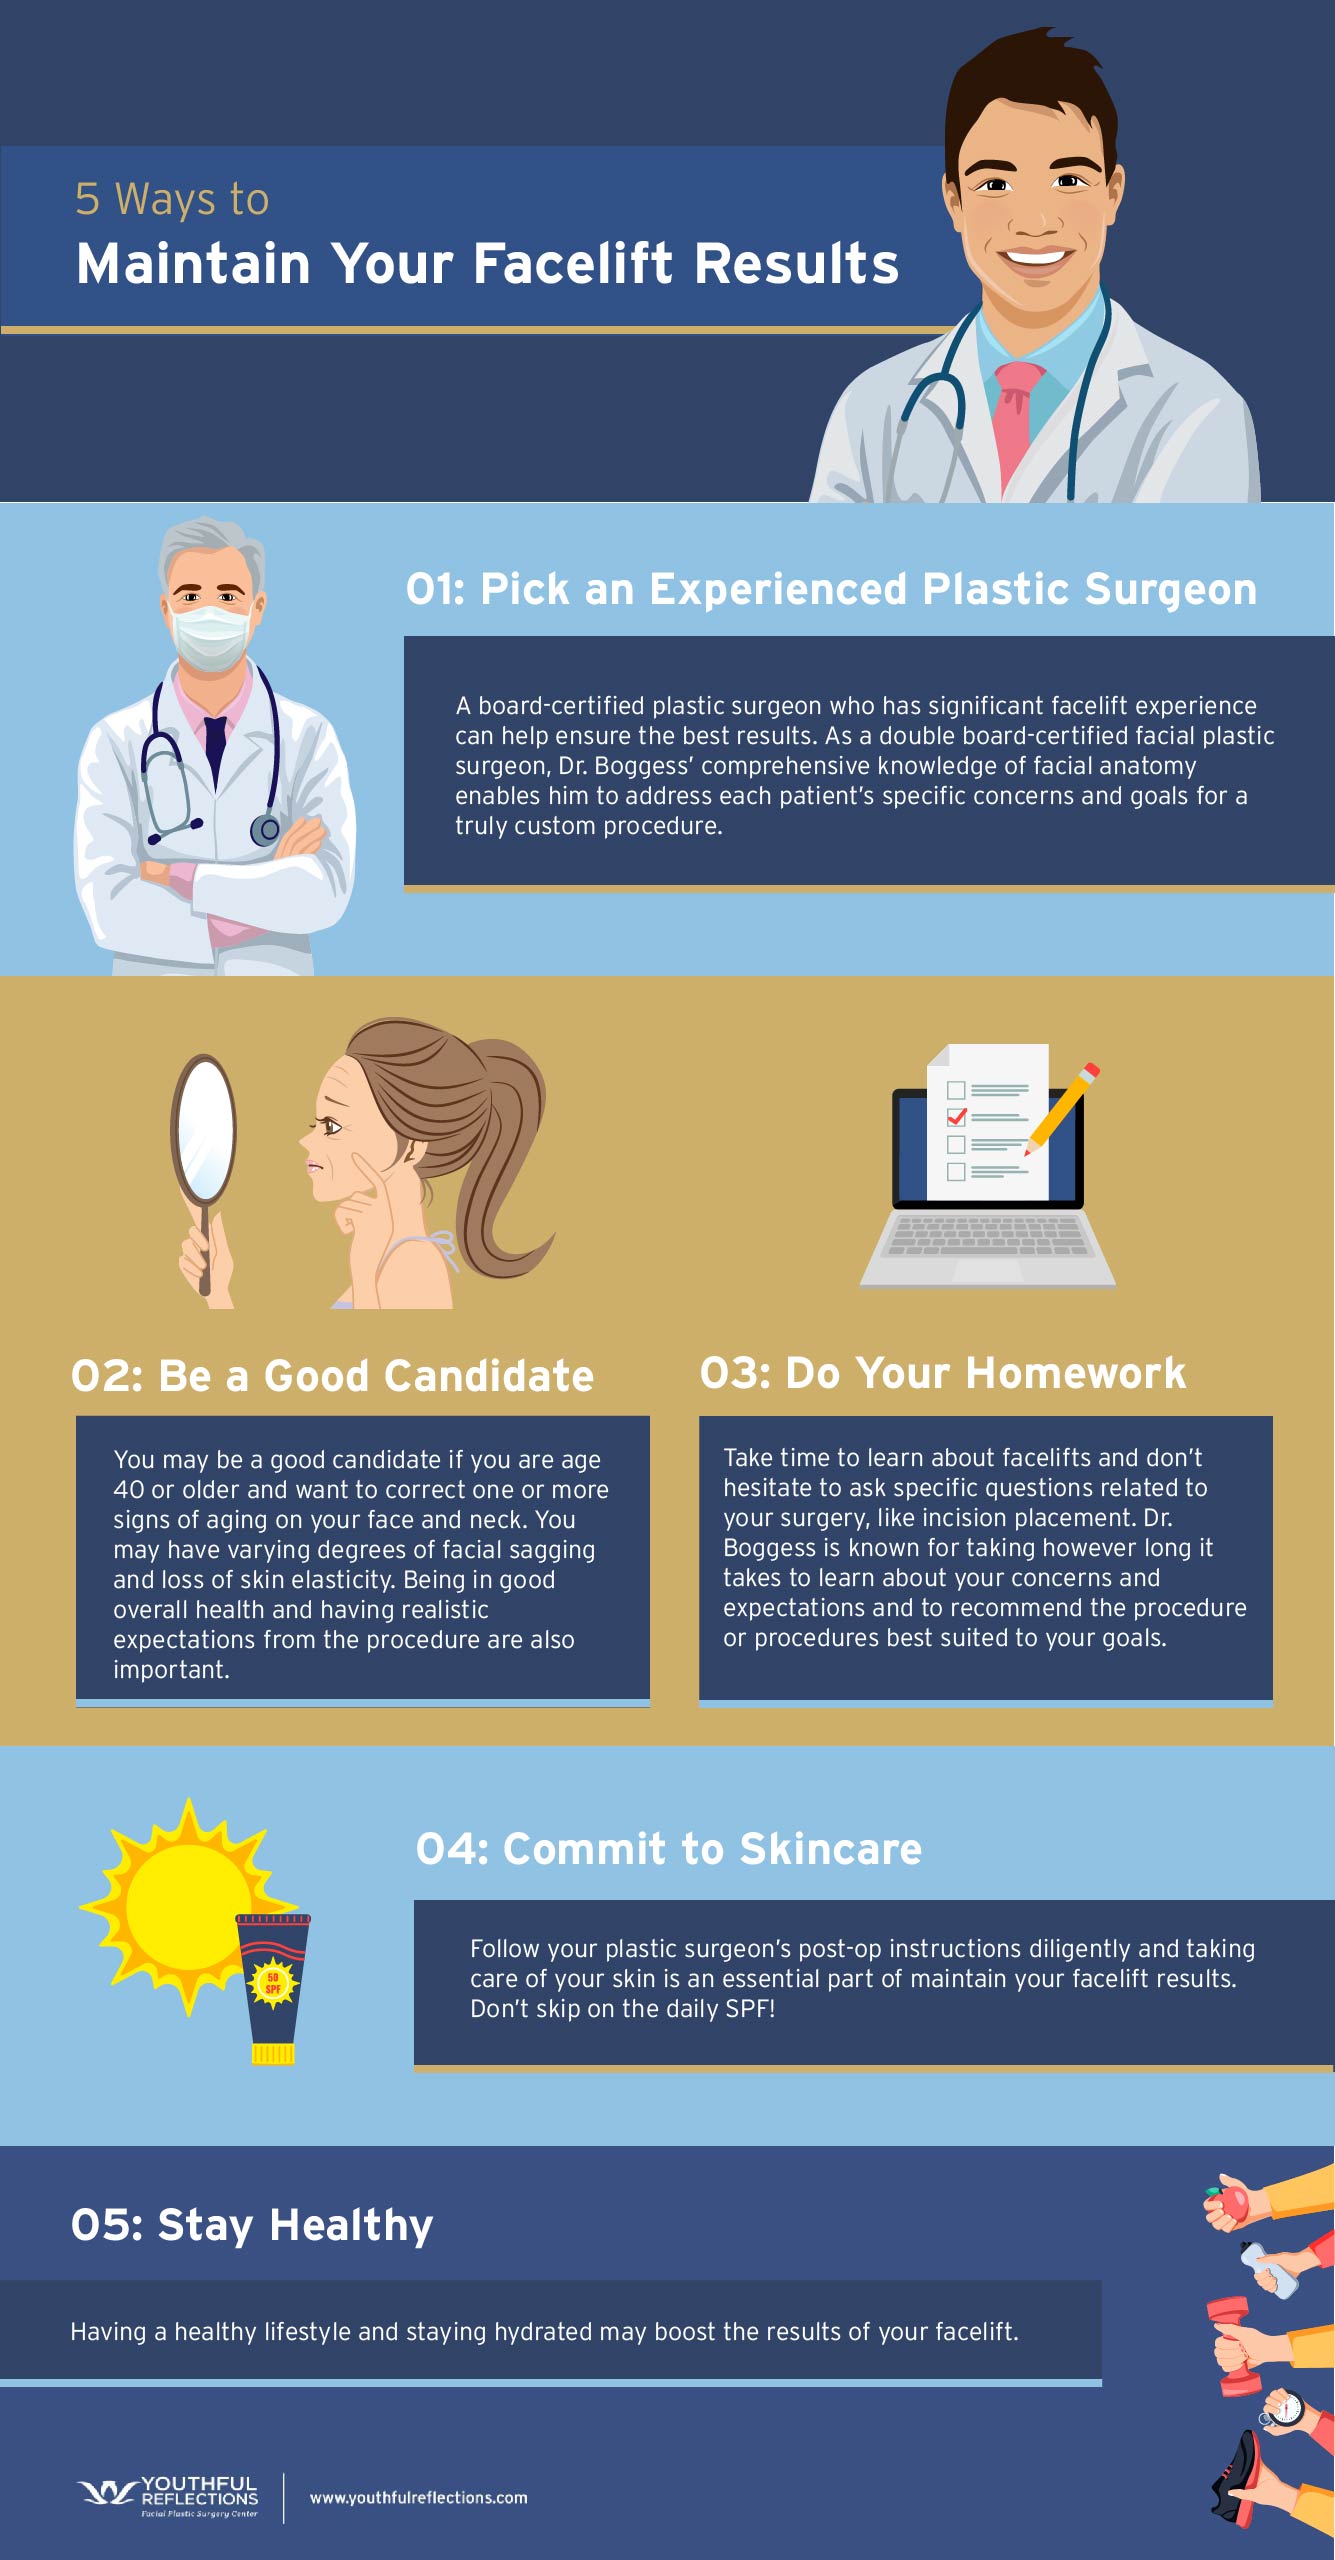 5 Ways to Maintain Your Facelift Results Infographic